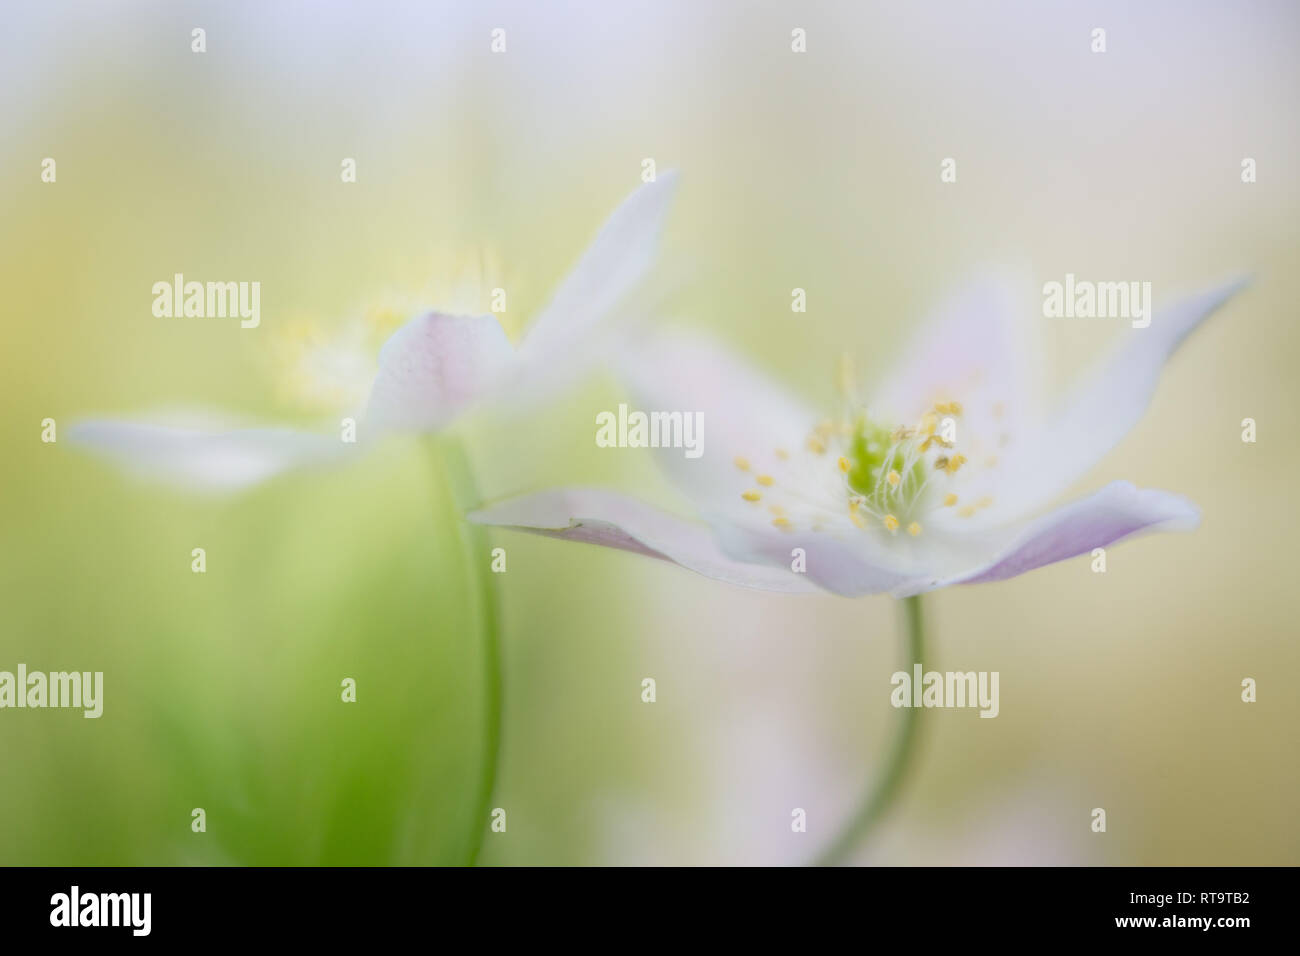 A pair of two wild spring flowers in love. Macro of wood anemone. Soft focus imae with shallow DOF giving an artistic and romantic look. Stock Photo